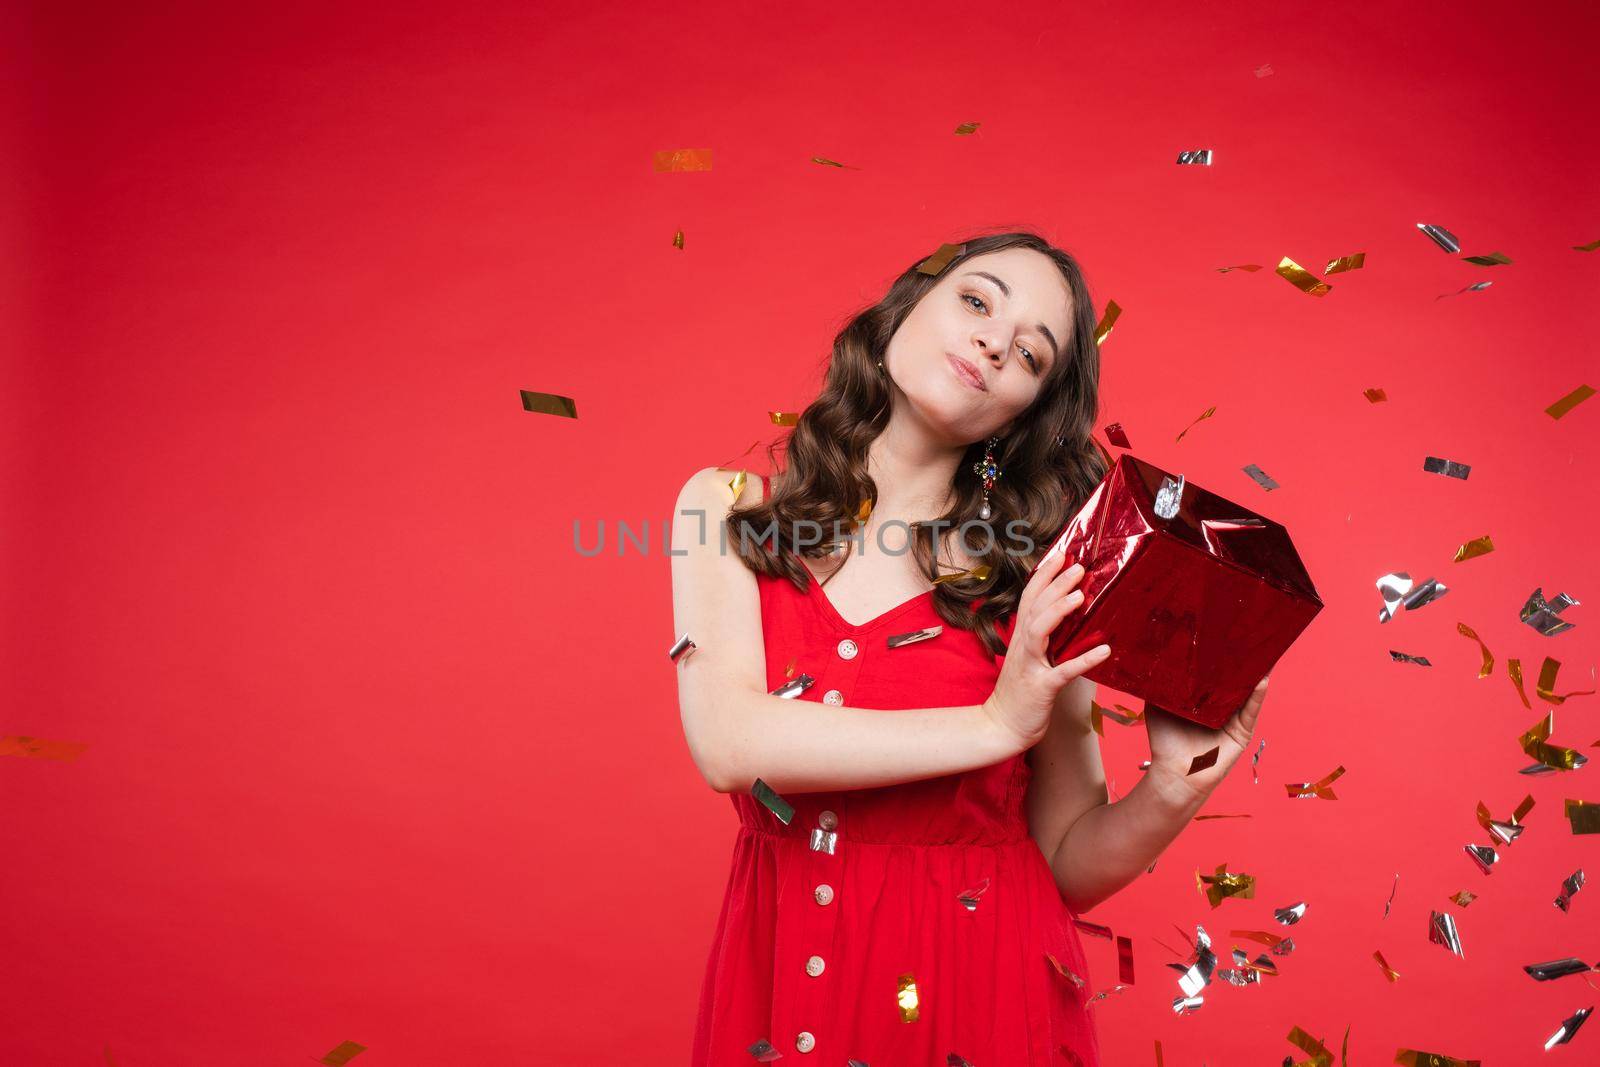 Portrait of adorable smiling young woman with long curly hair posing at red studio background by StudioLucky